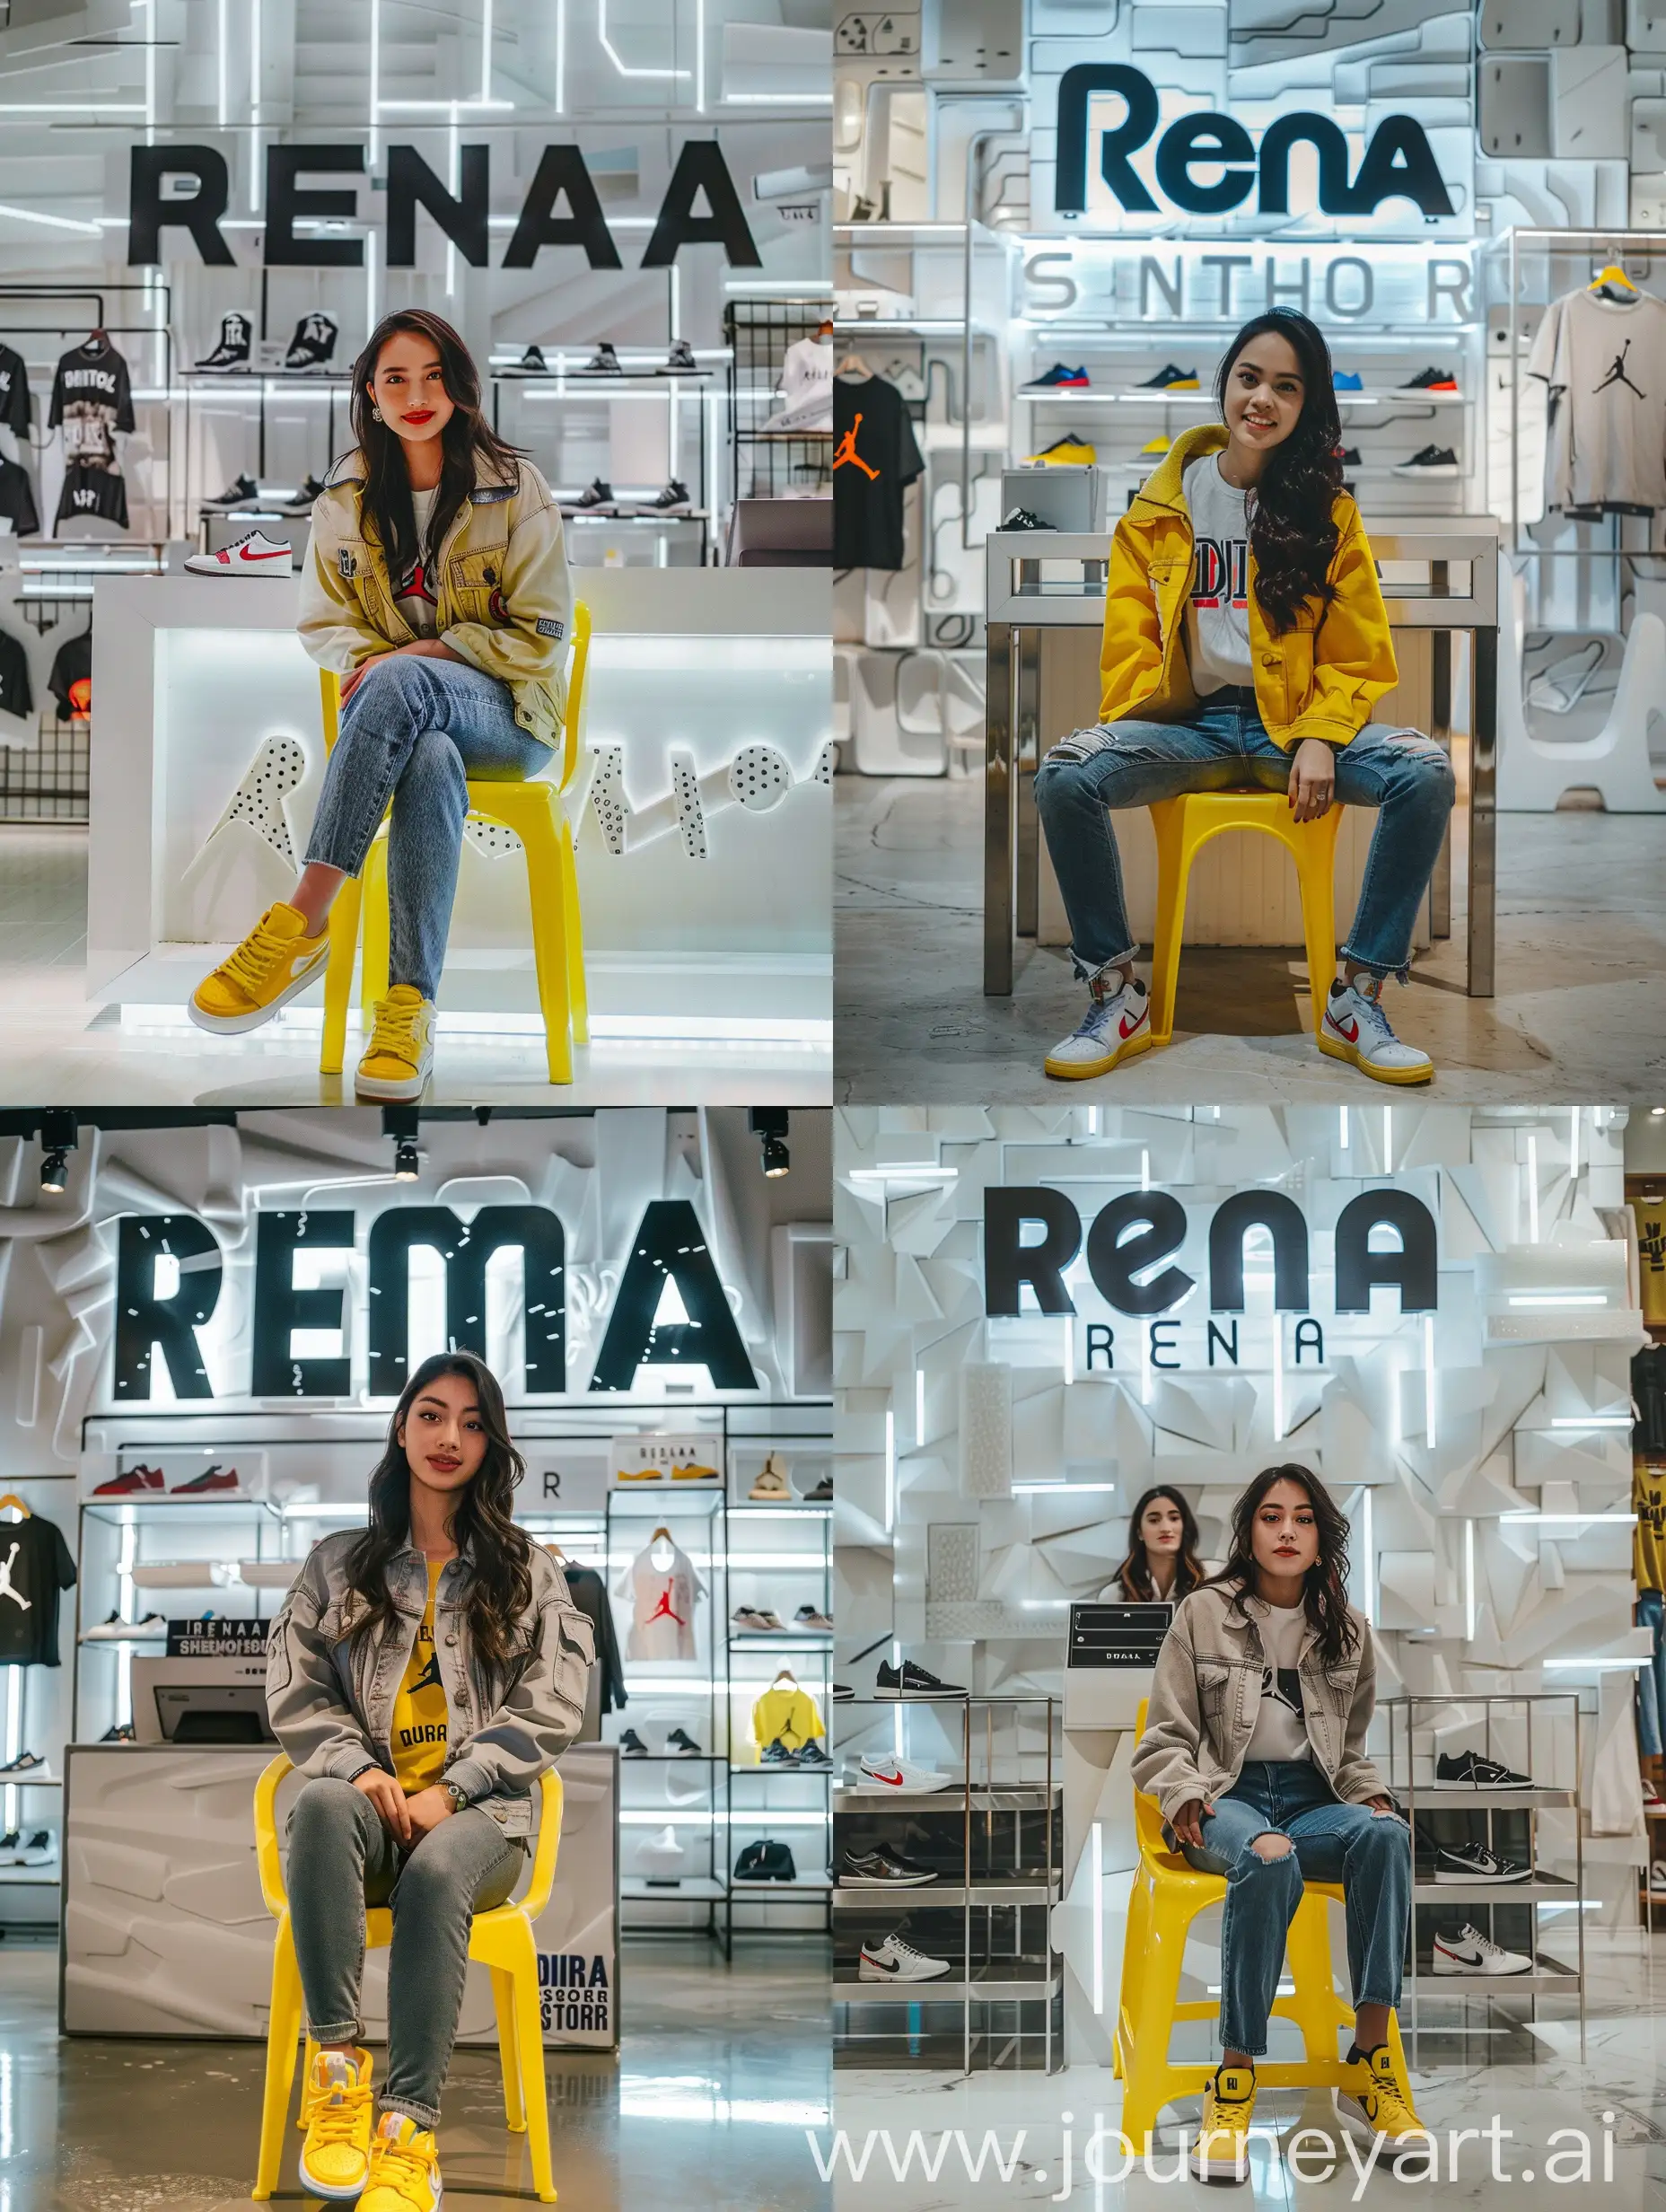 Stylish-Thai-Woman-at-Modern-Retail-Store-with-Rena-Store-Sign